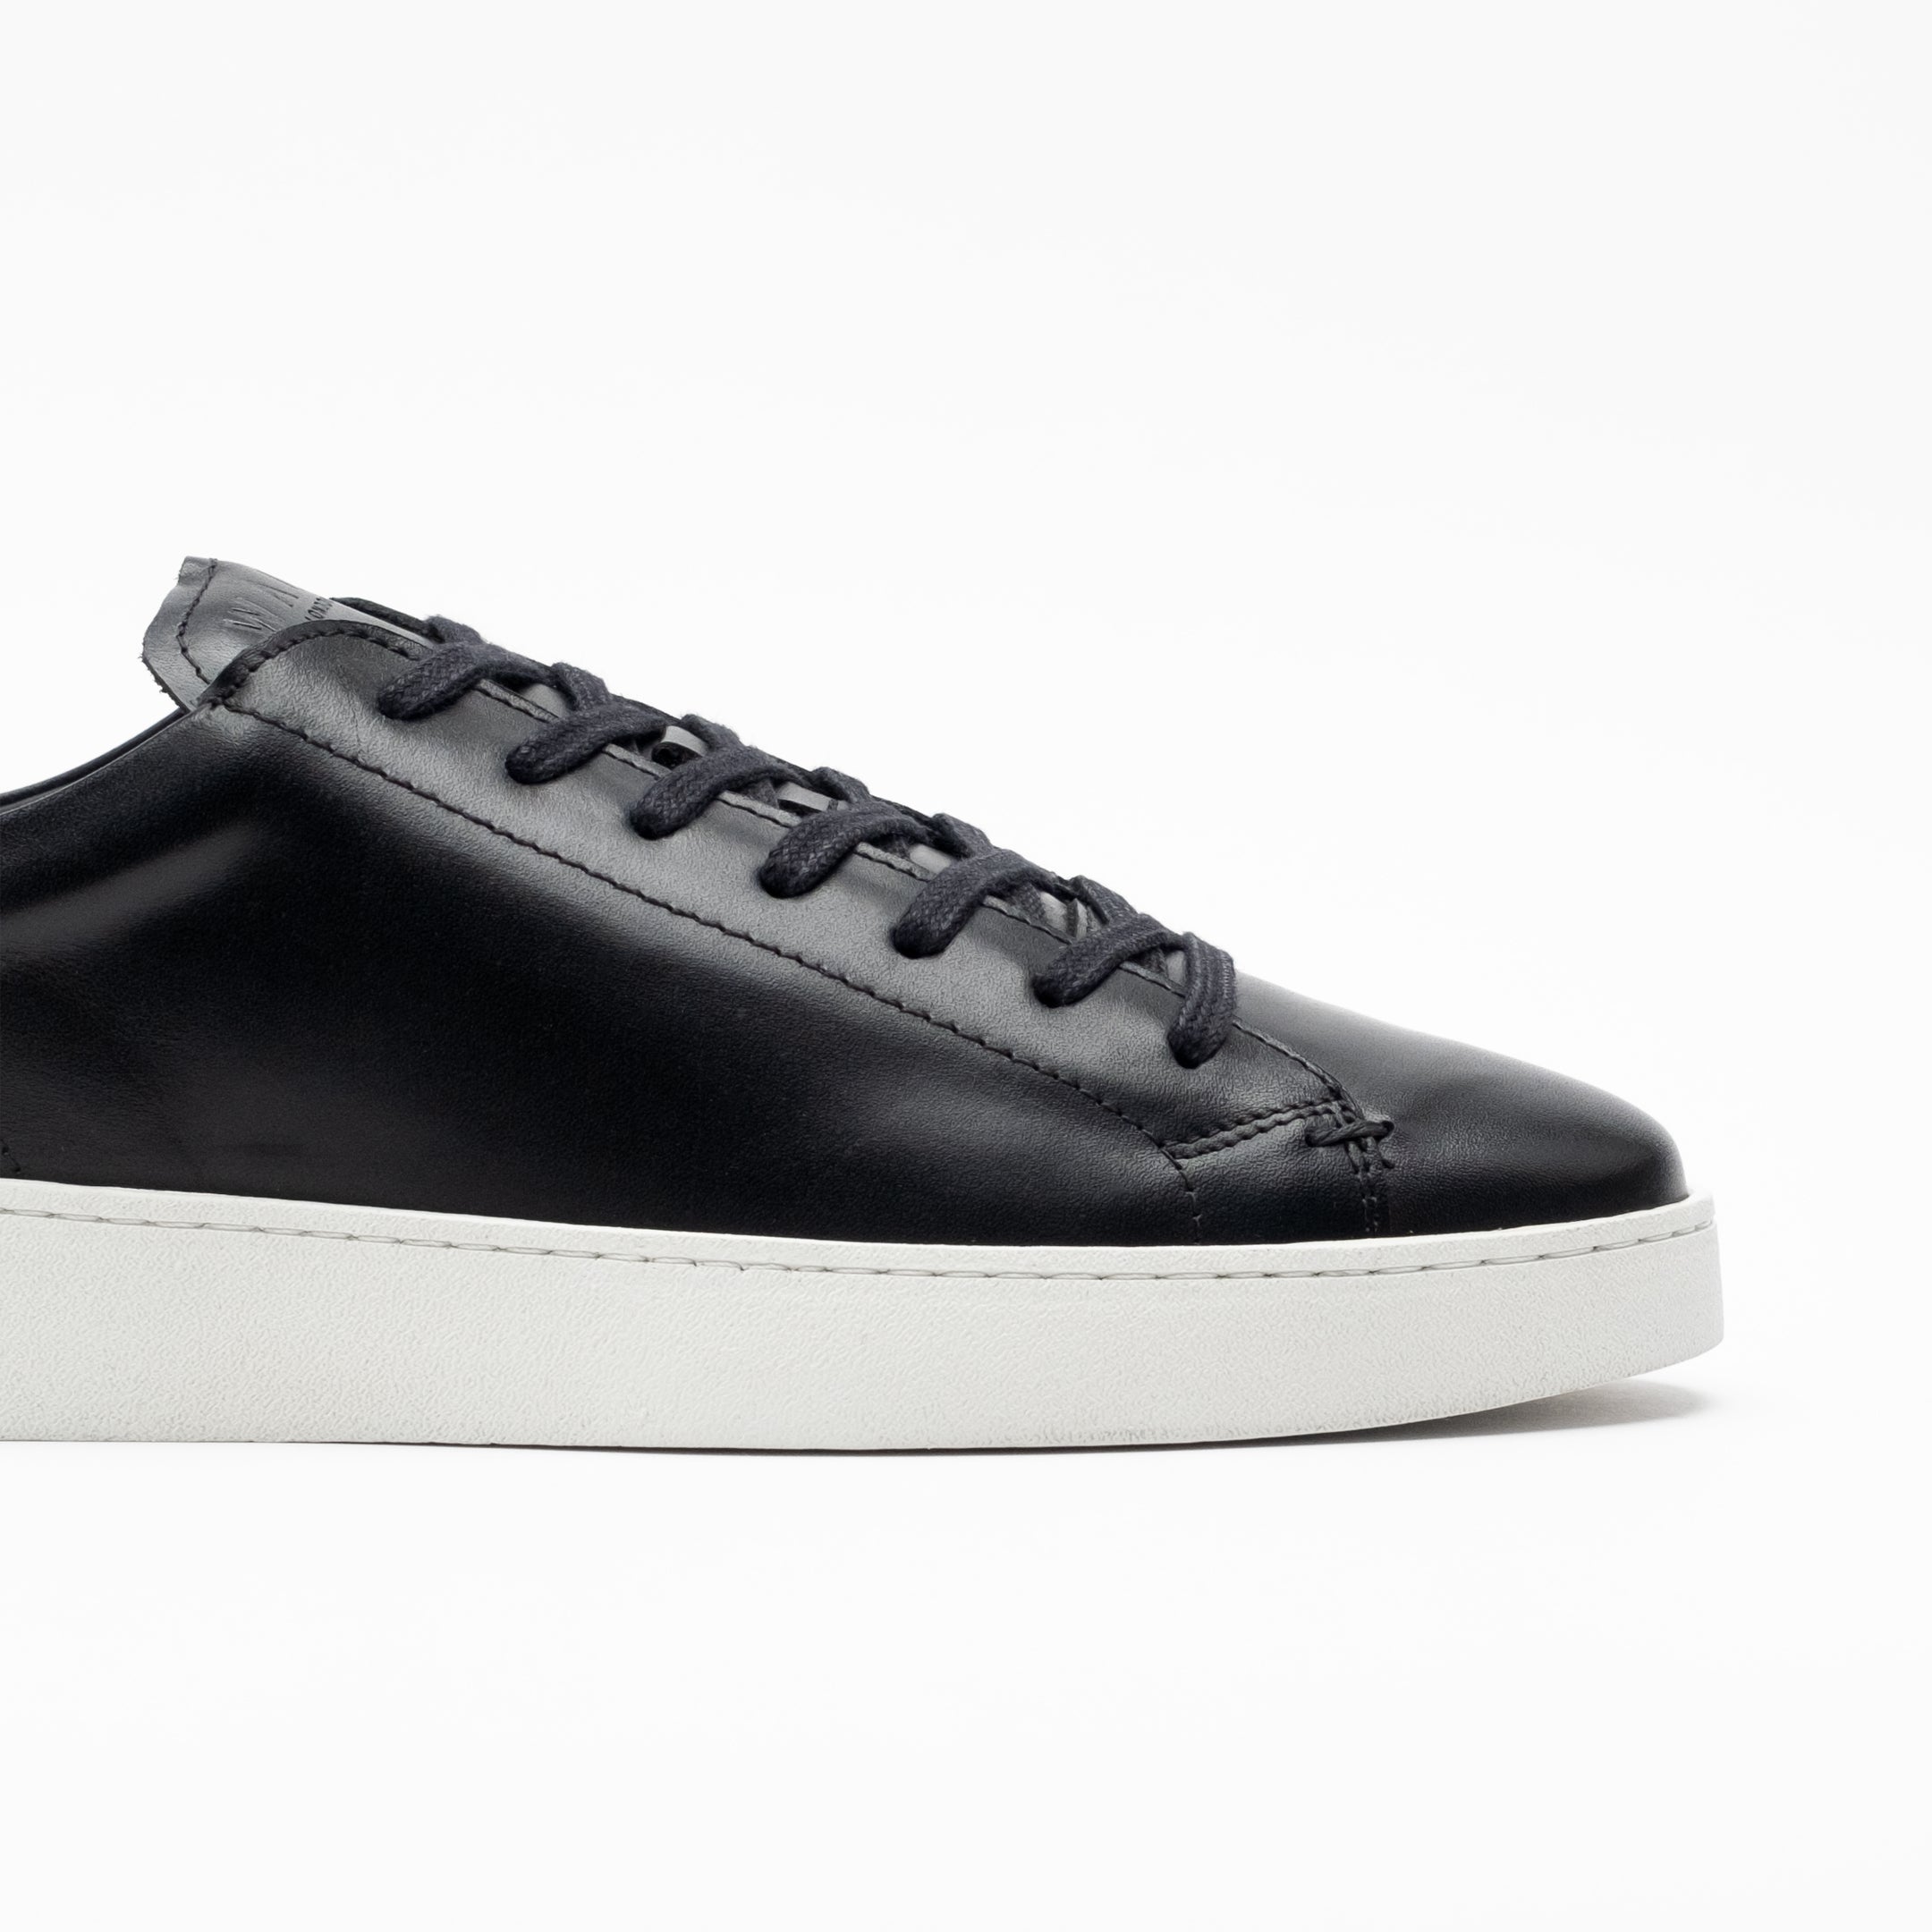 Walk London Mens Marco Trainer in Black Leather